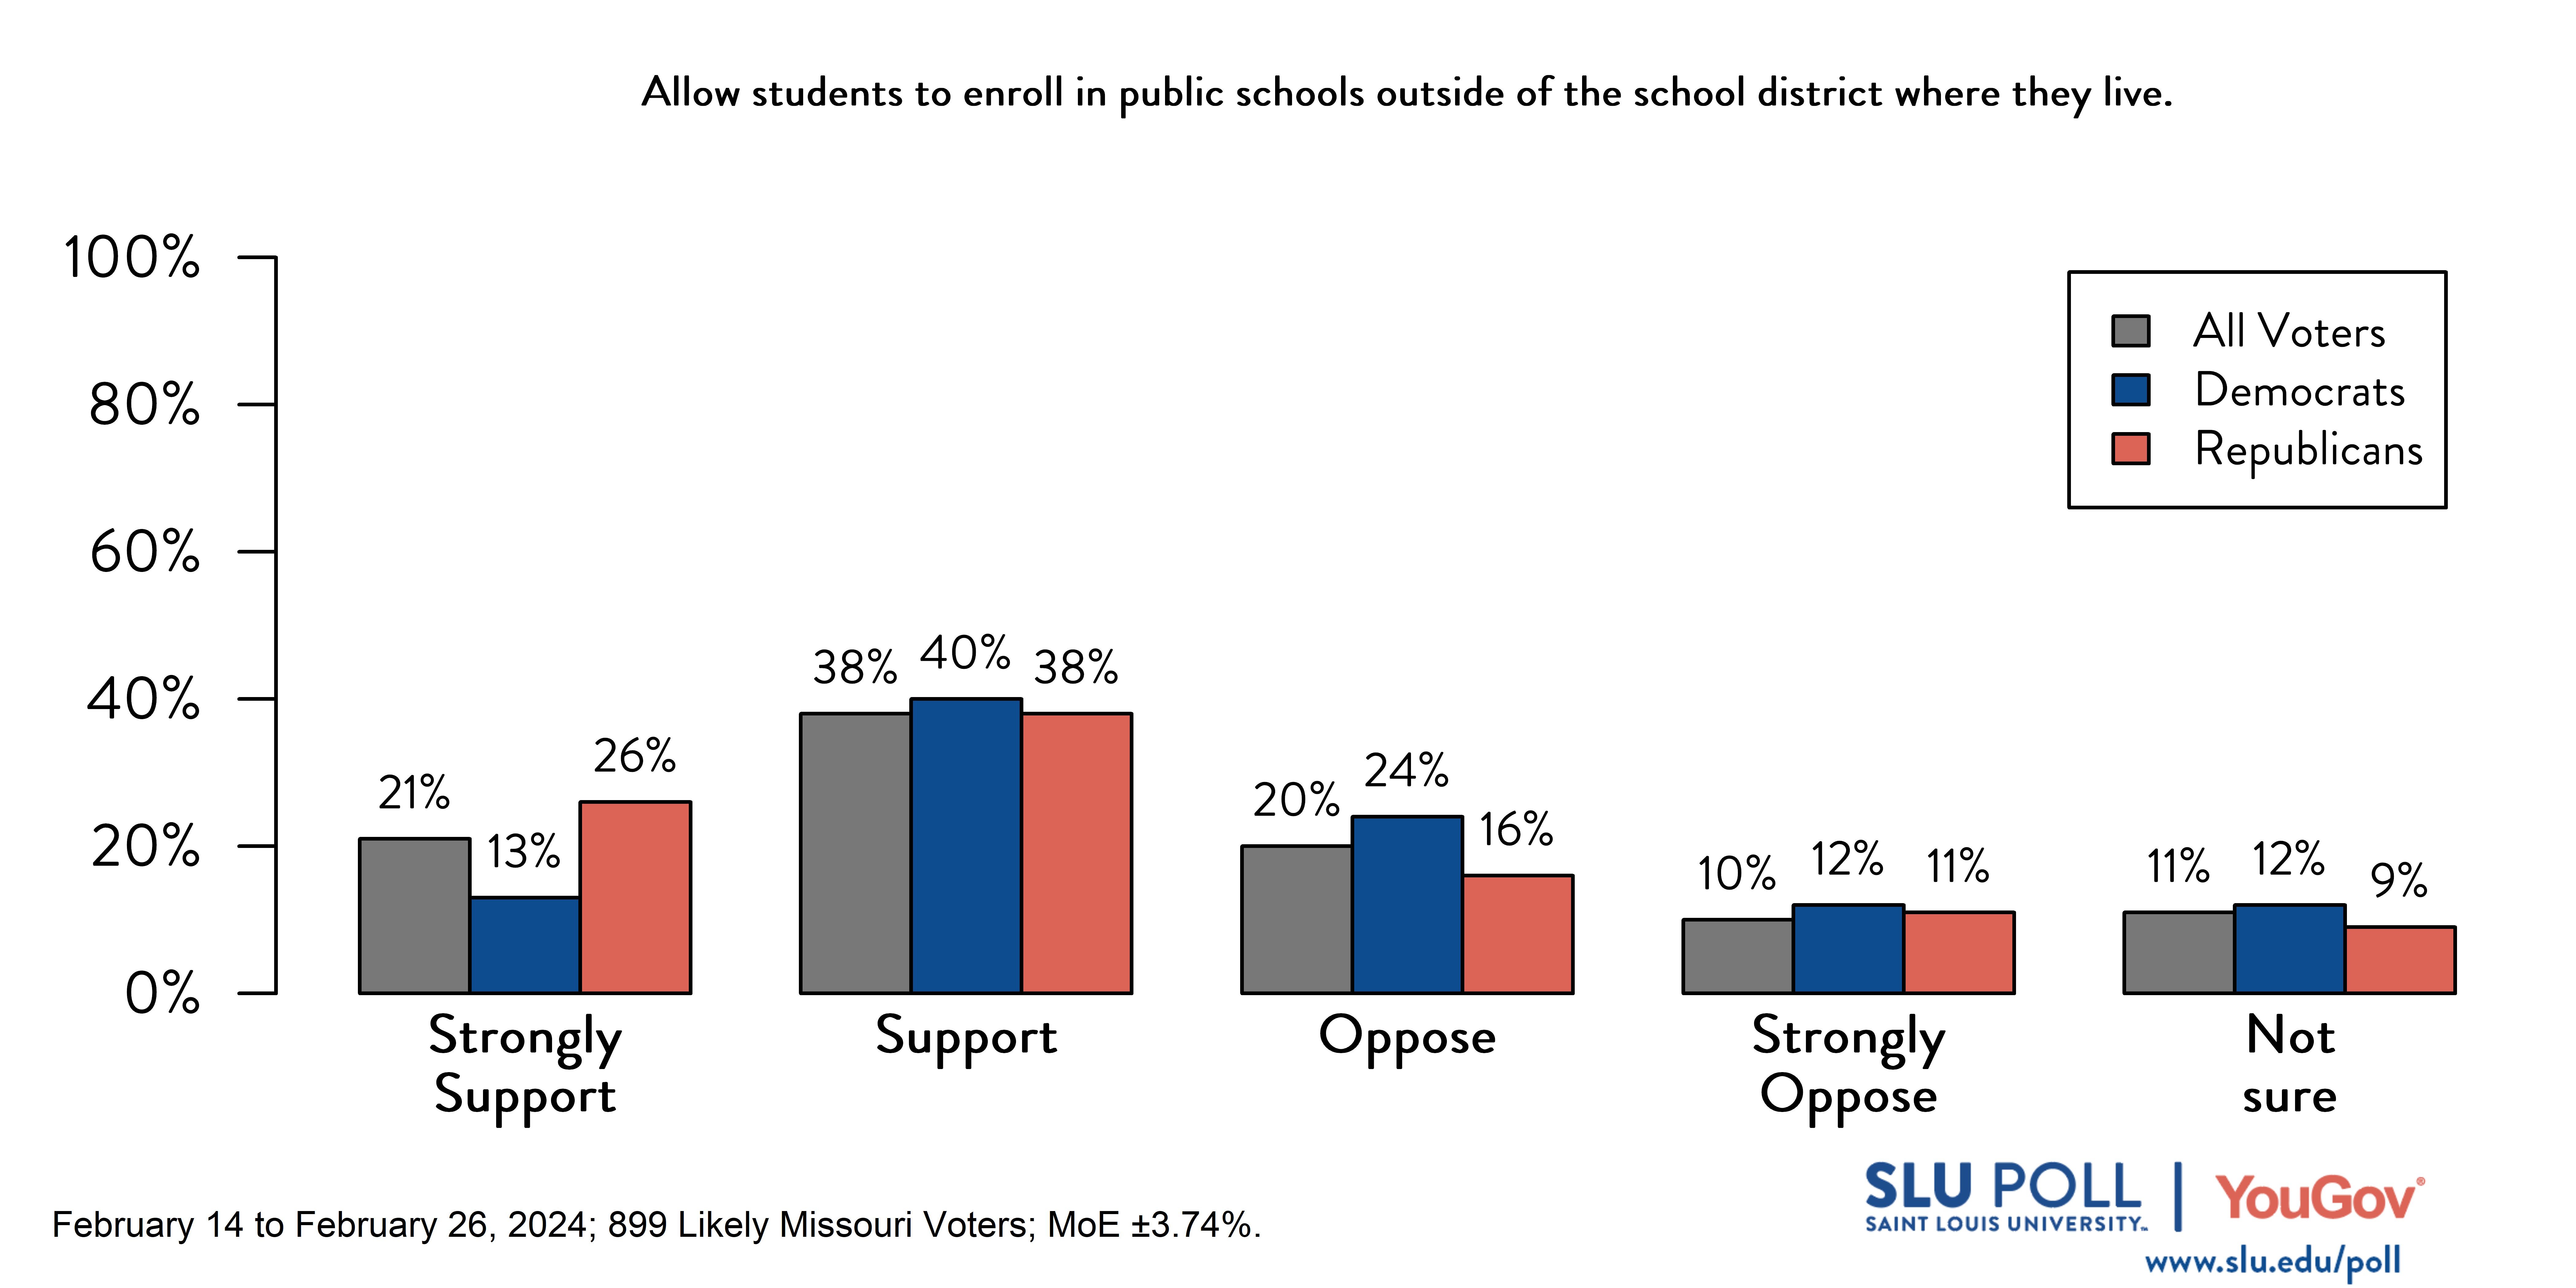 Likely voters' responses to 'Do you support or oppose the following policies…Allow students to enroll in public schools outside of the school district where they live?': 21% Strongly support, 38% Support, 20% Oppose, 10% Strongly oppose, and 11% Not sure. Democratic voters' responses: ' 13% Strongly support, 40% Support, 24% Oppose, 12% Strongly oppose, and 12% Not sure. Republican voters' responses:  26% Strongly support, 38% Support, 16% Oppose, 11% Strongly oppose, and 9% Not sure.